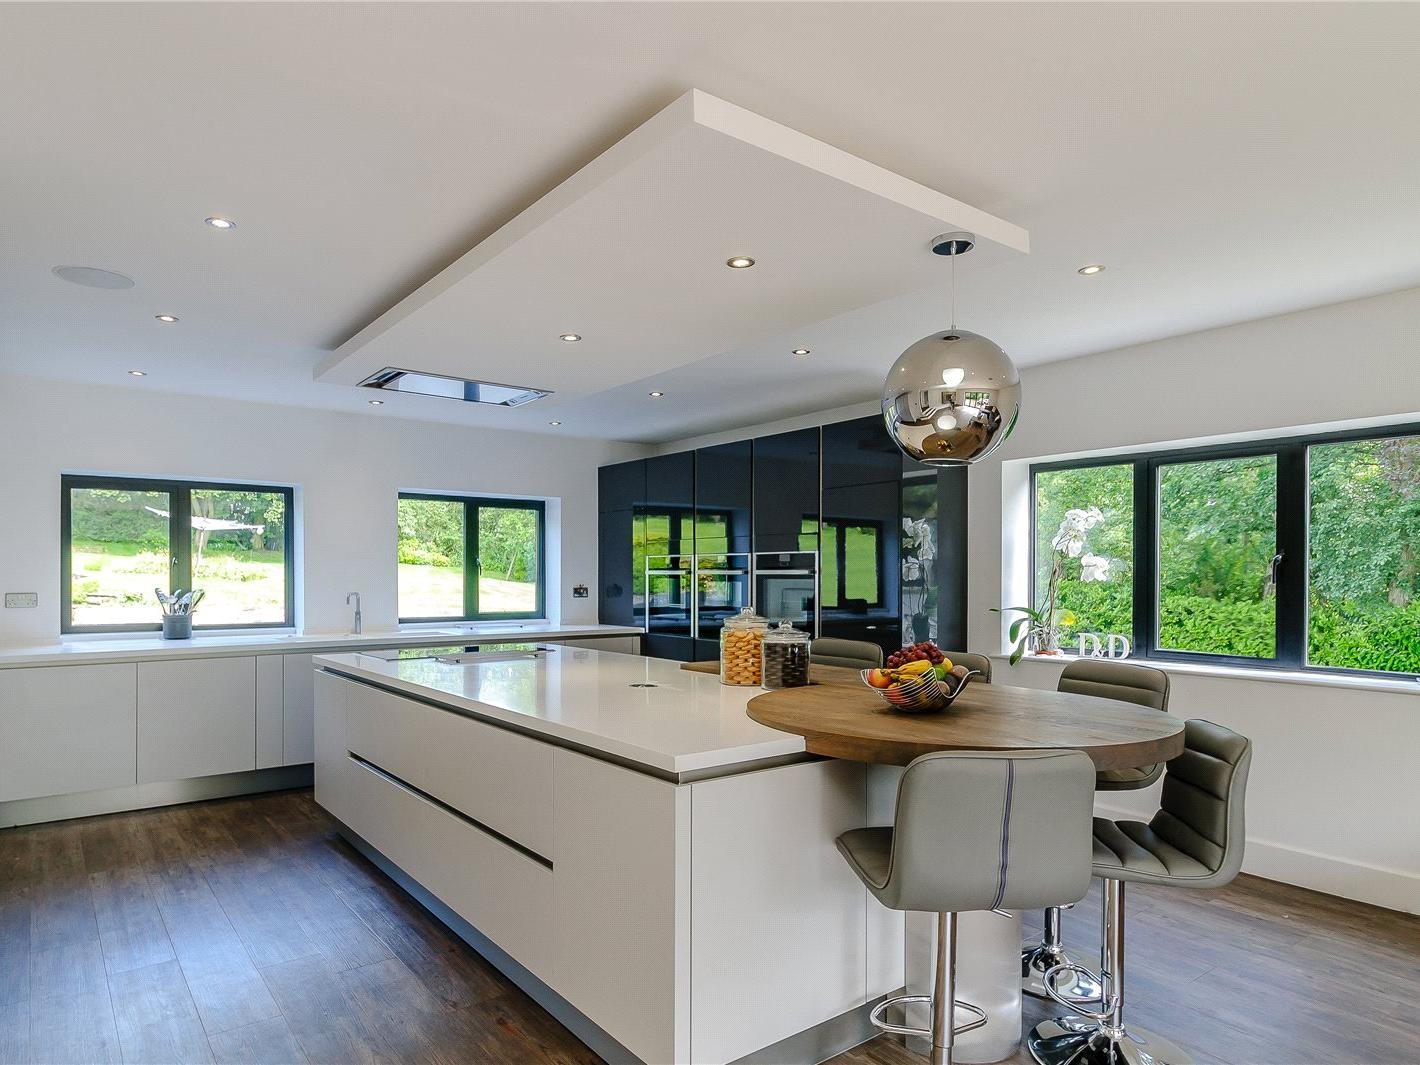 At the heart of the home is a large, newly fitted dining kitchen, which boasts a central island with a wooden breakfast bar